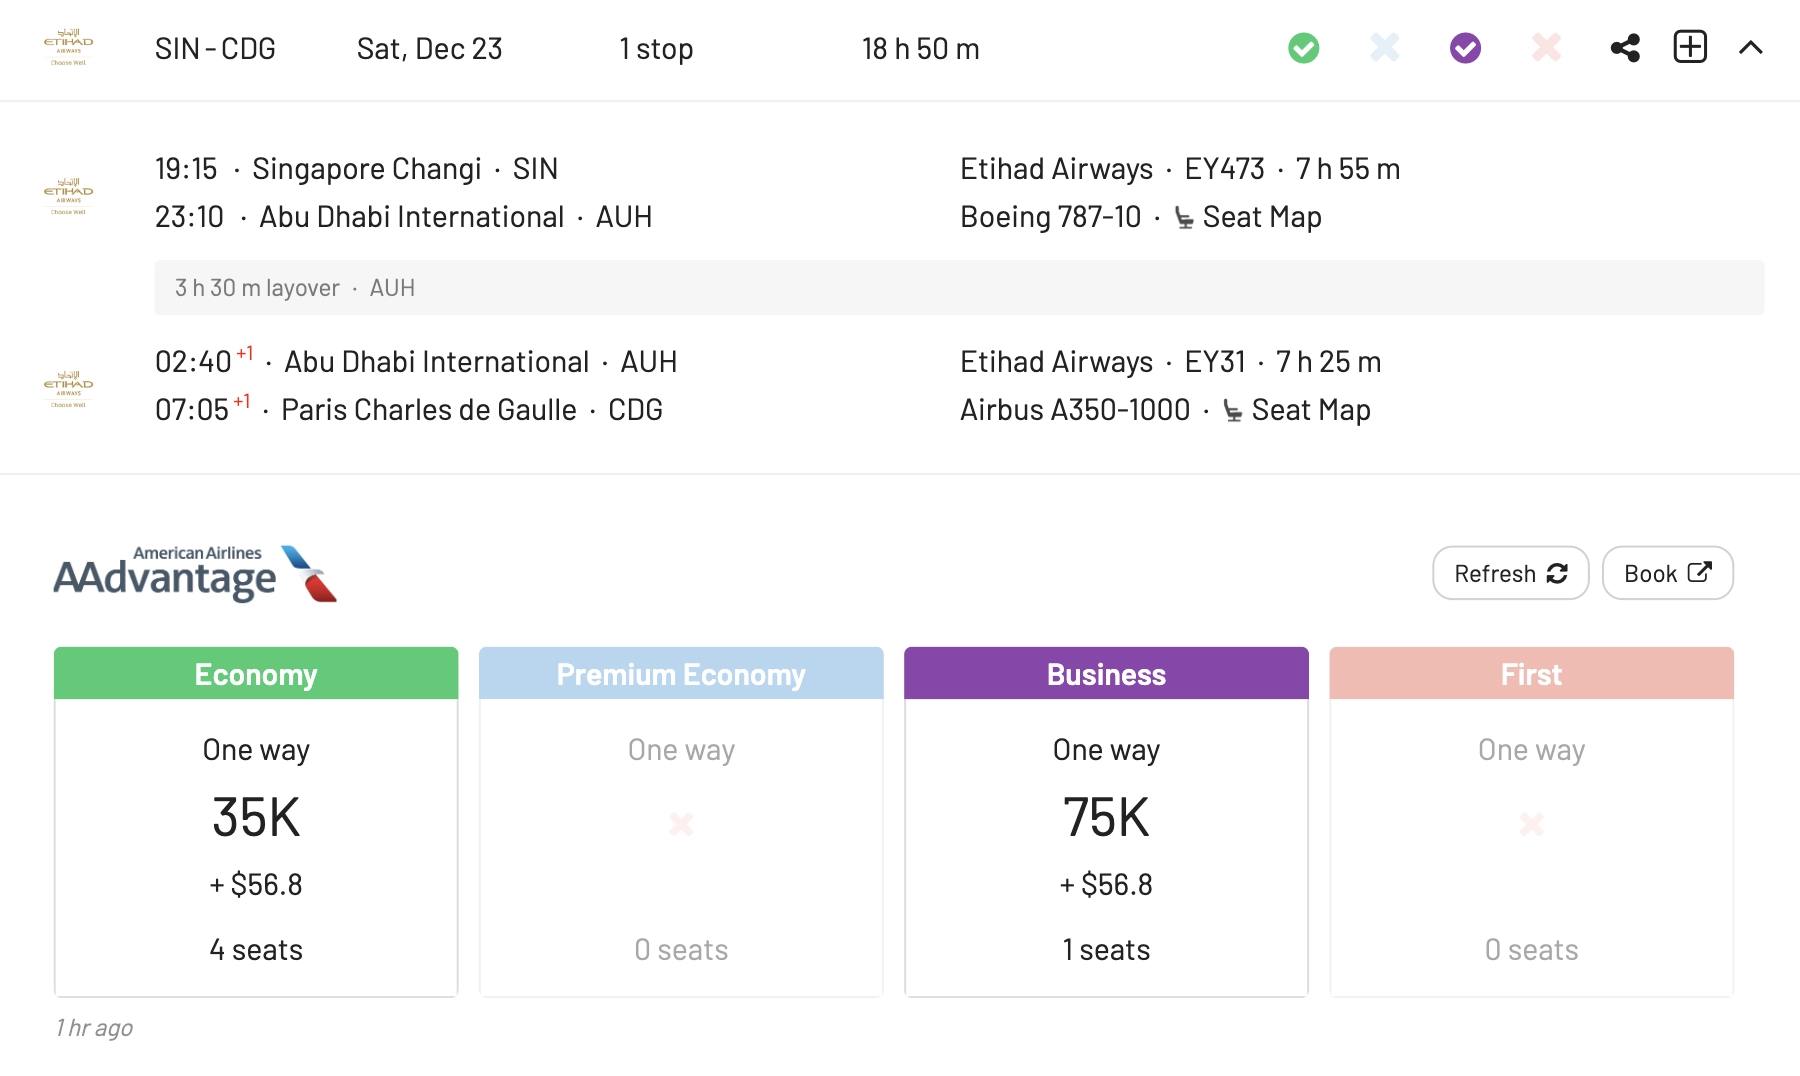 Singapore to Paris in Business Class for 75k AAdvantage Miles